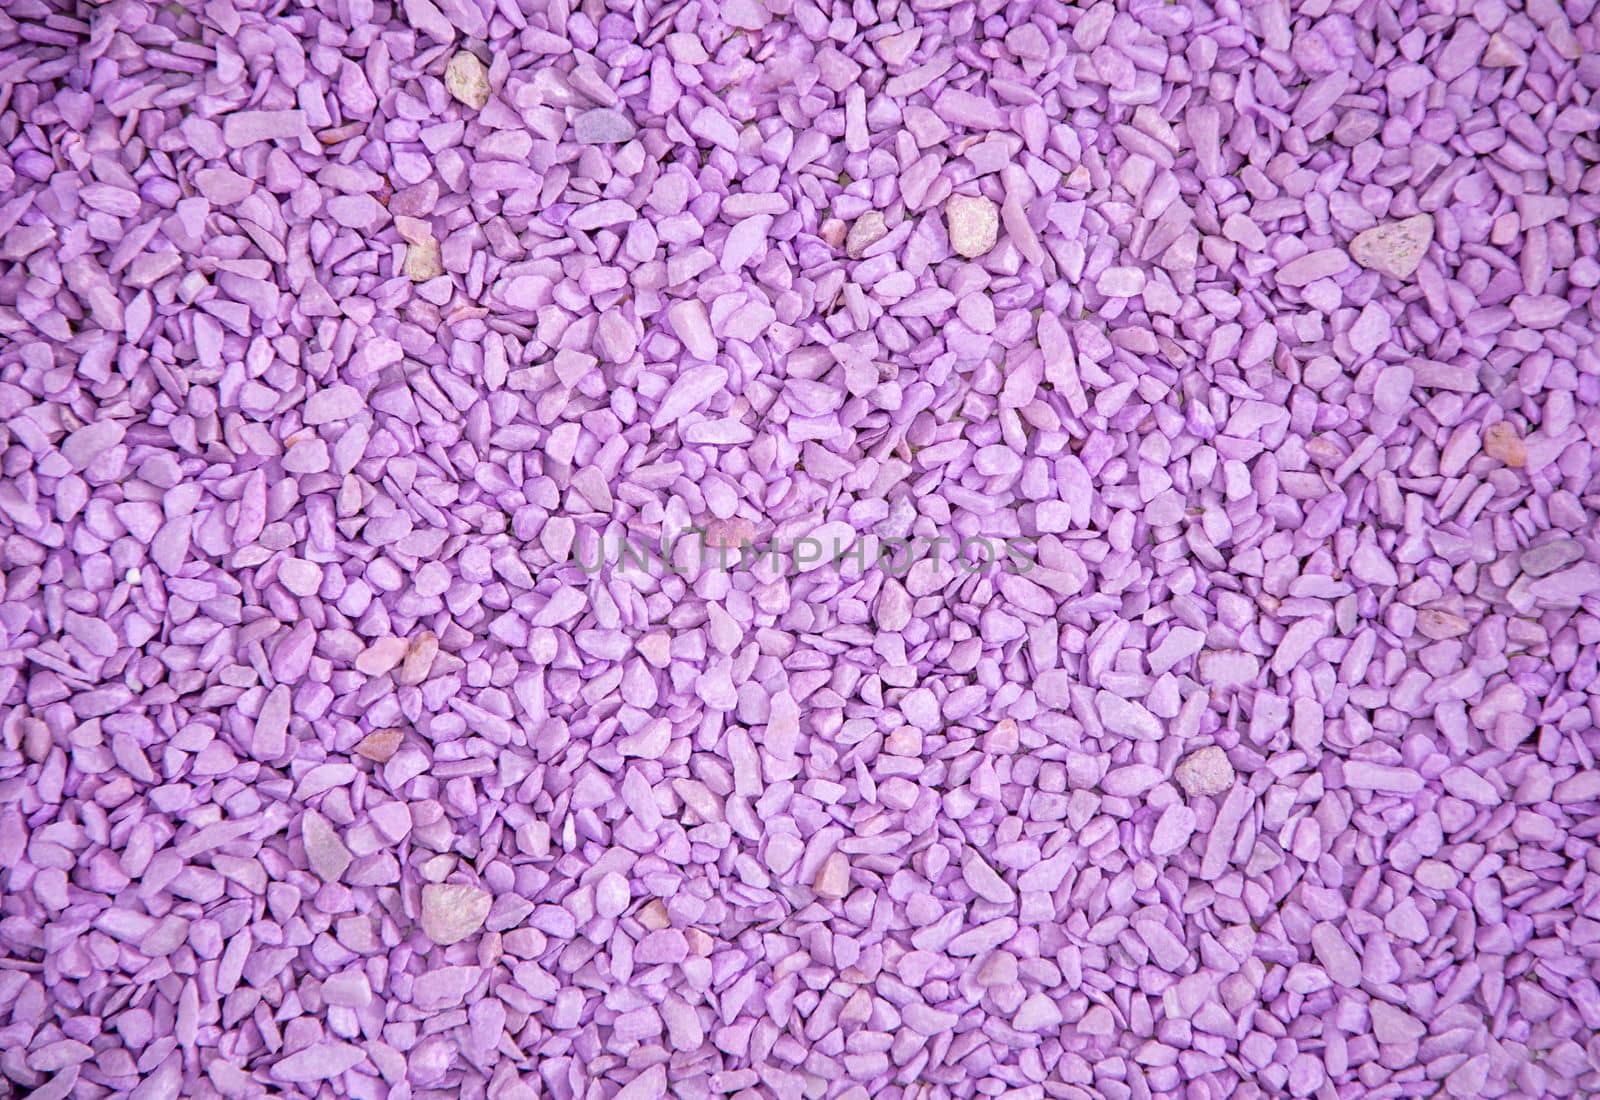 Ultraviolet fine stone texture, lilac surface, small stones background by KaterinaDalemans